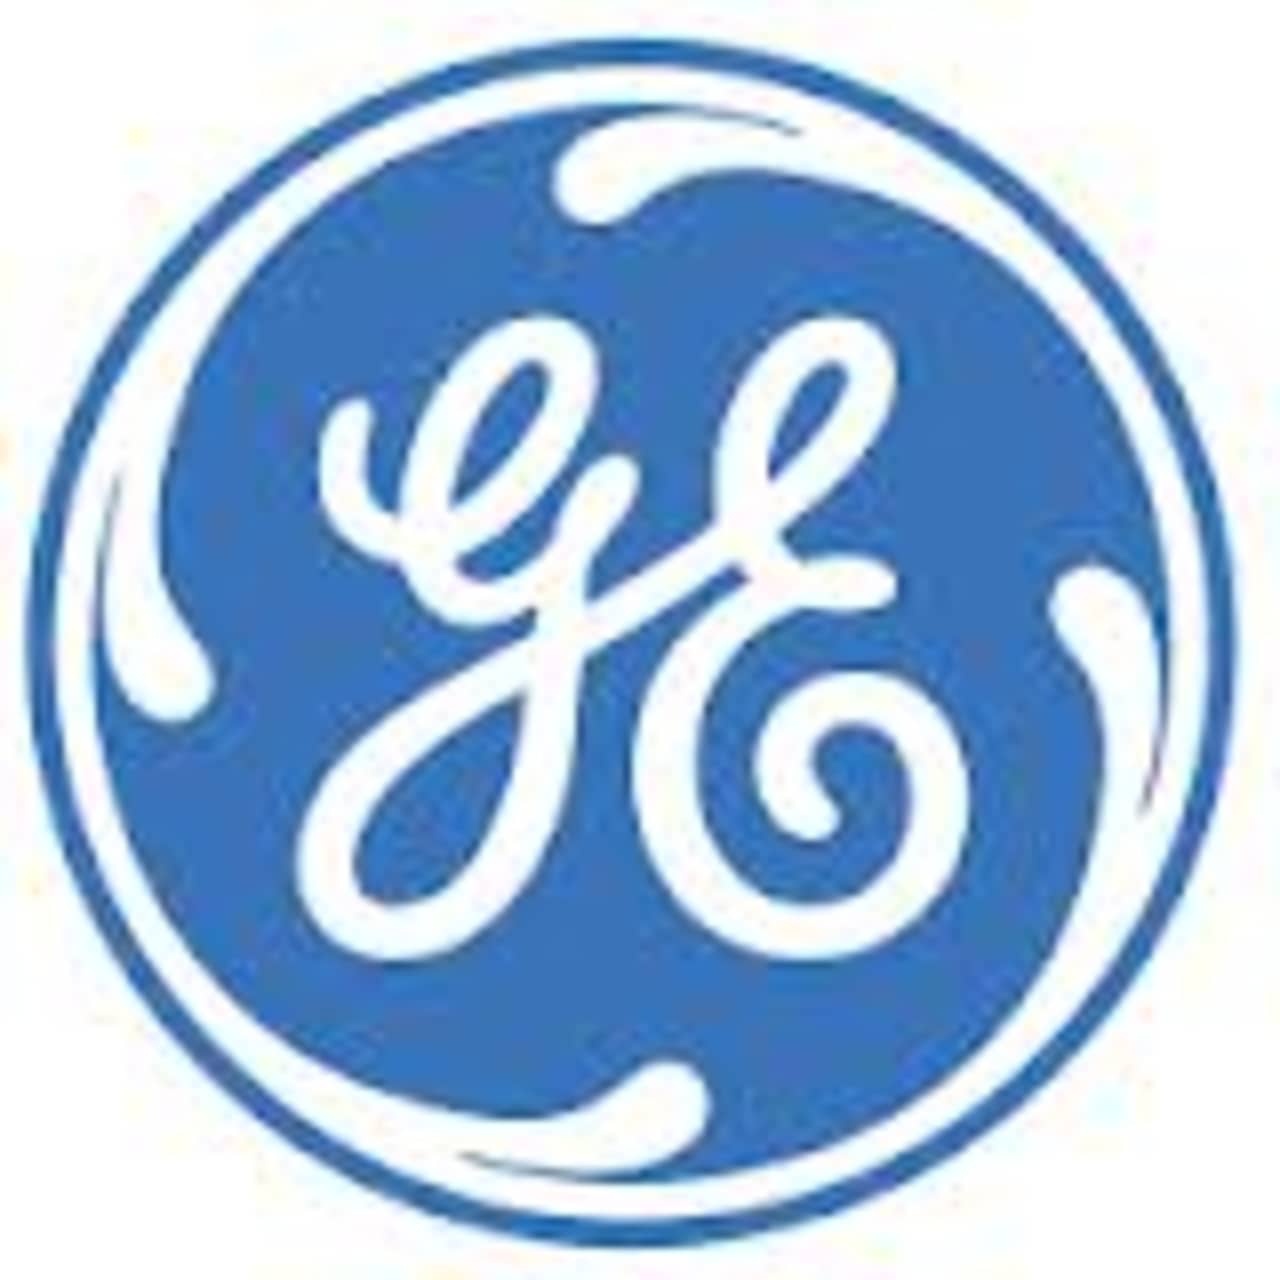 Fairfield-based General Electric is still the highest ranking company in Connecticut on the Fortune 500 list. 